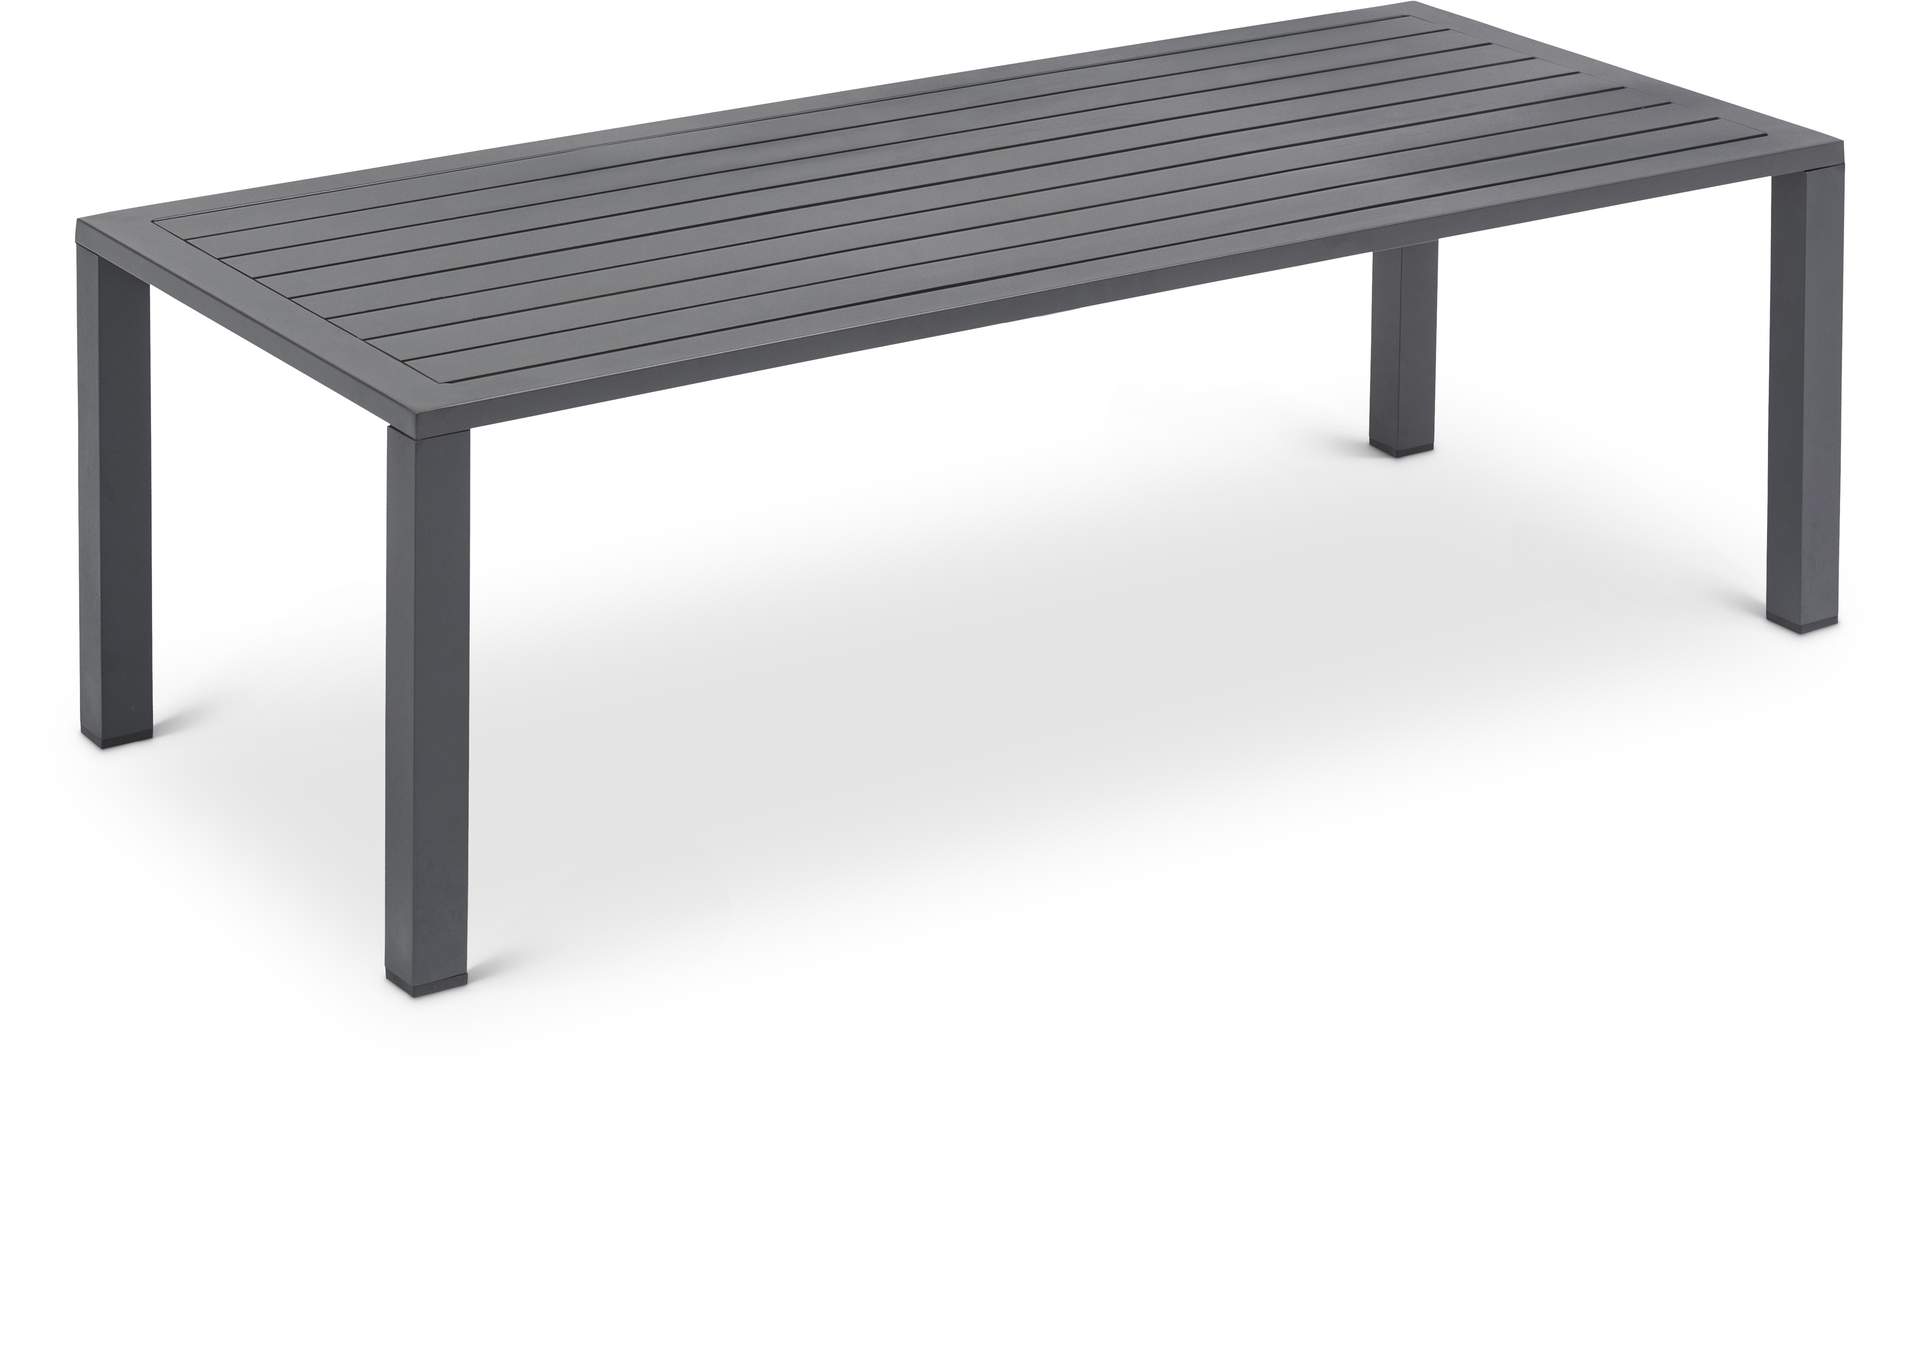 Maldives Outdoor Patio Coffee Table,Meridian Furniture